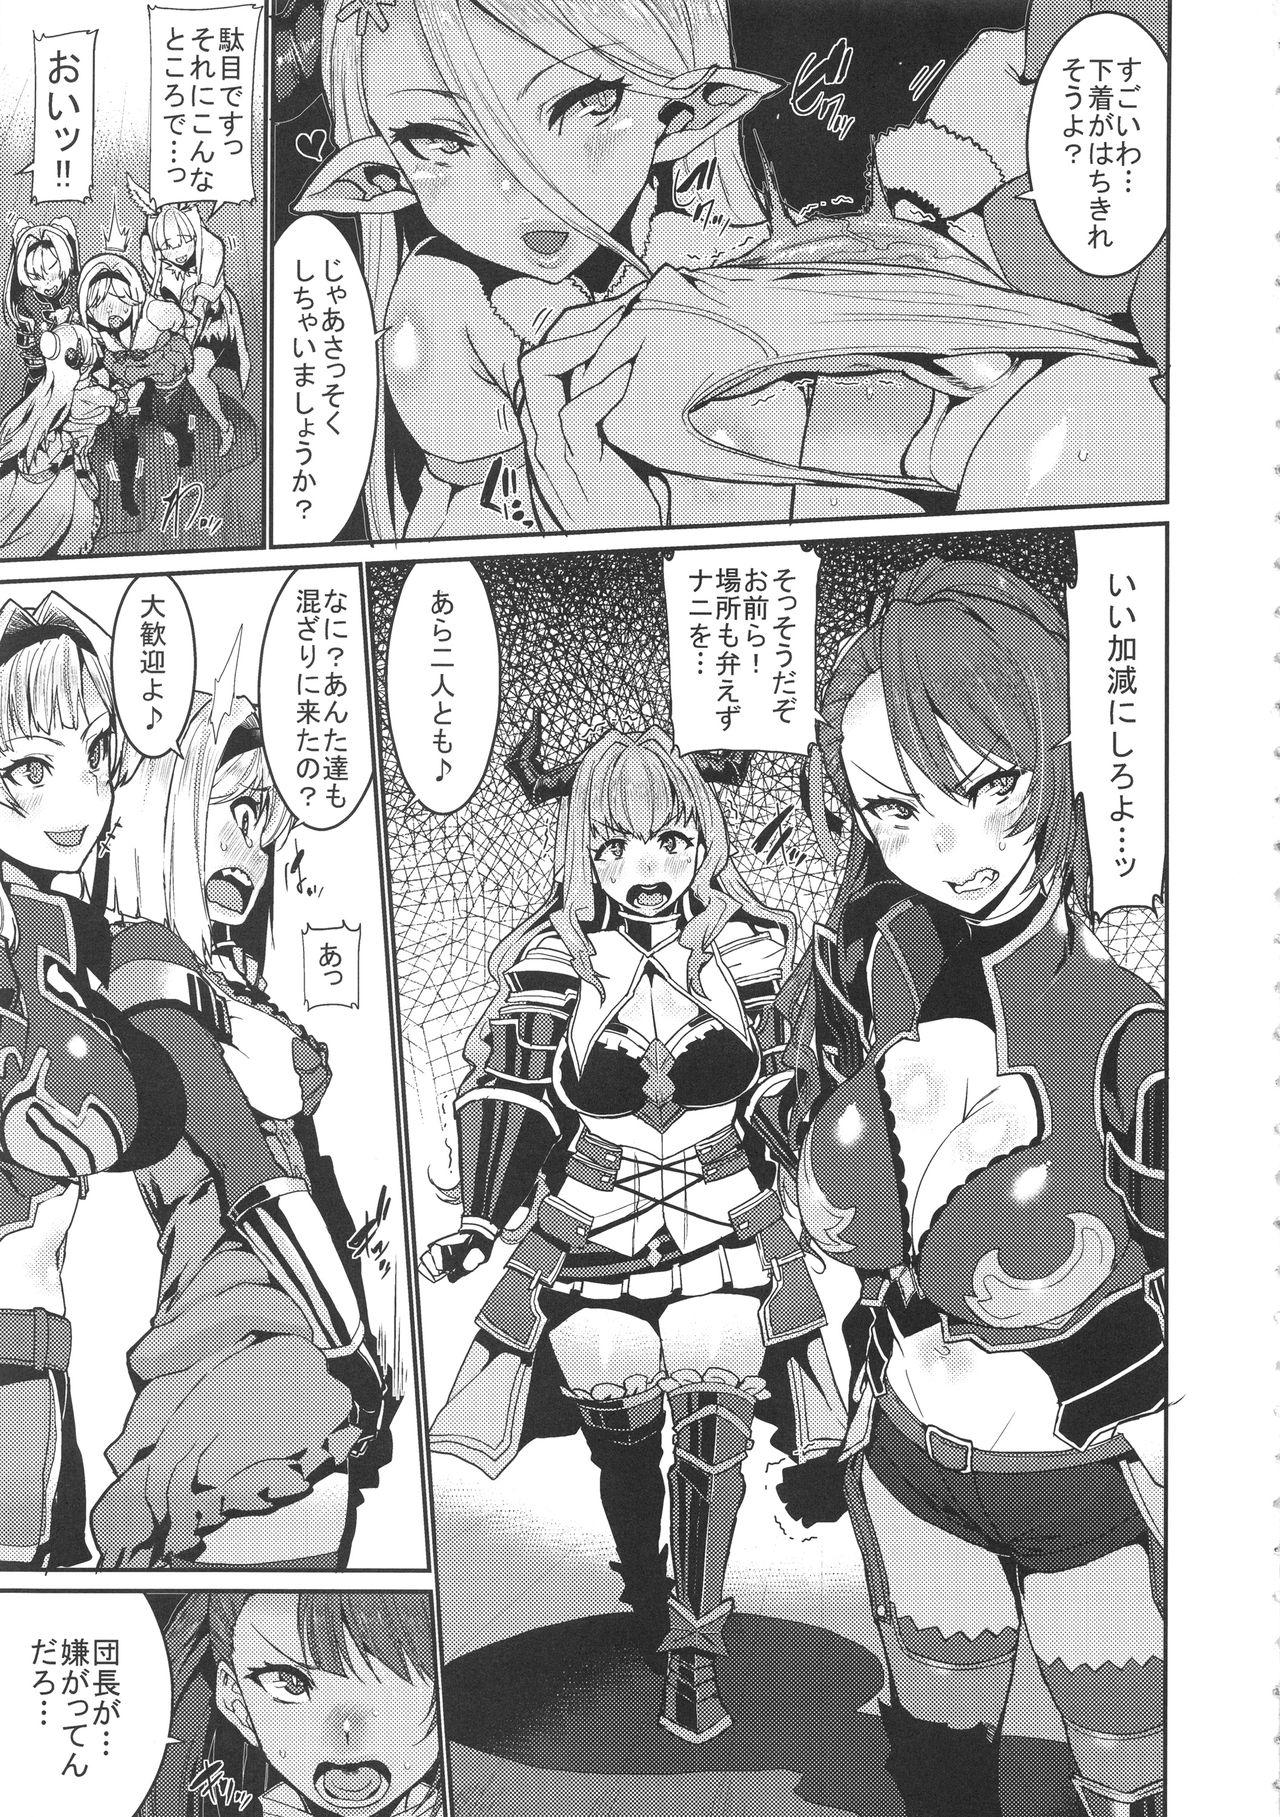 Shy Be covered, be smeared - Granblue fantasy Hardcore - Page 7